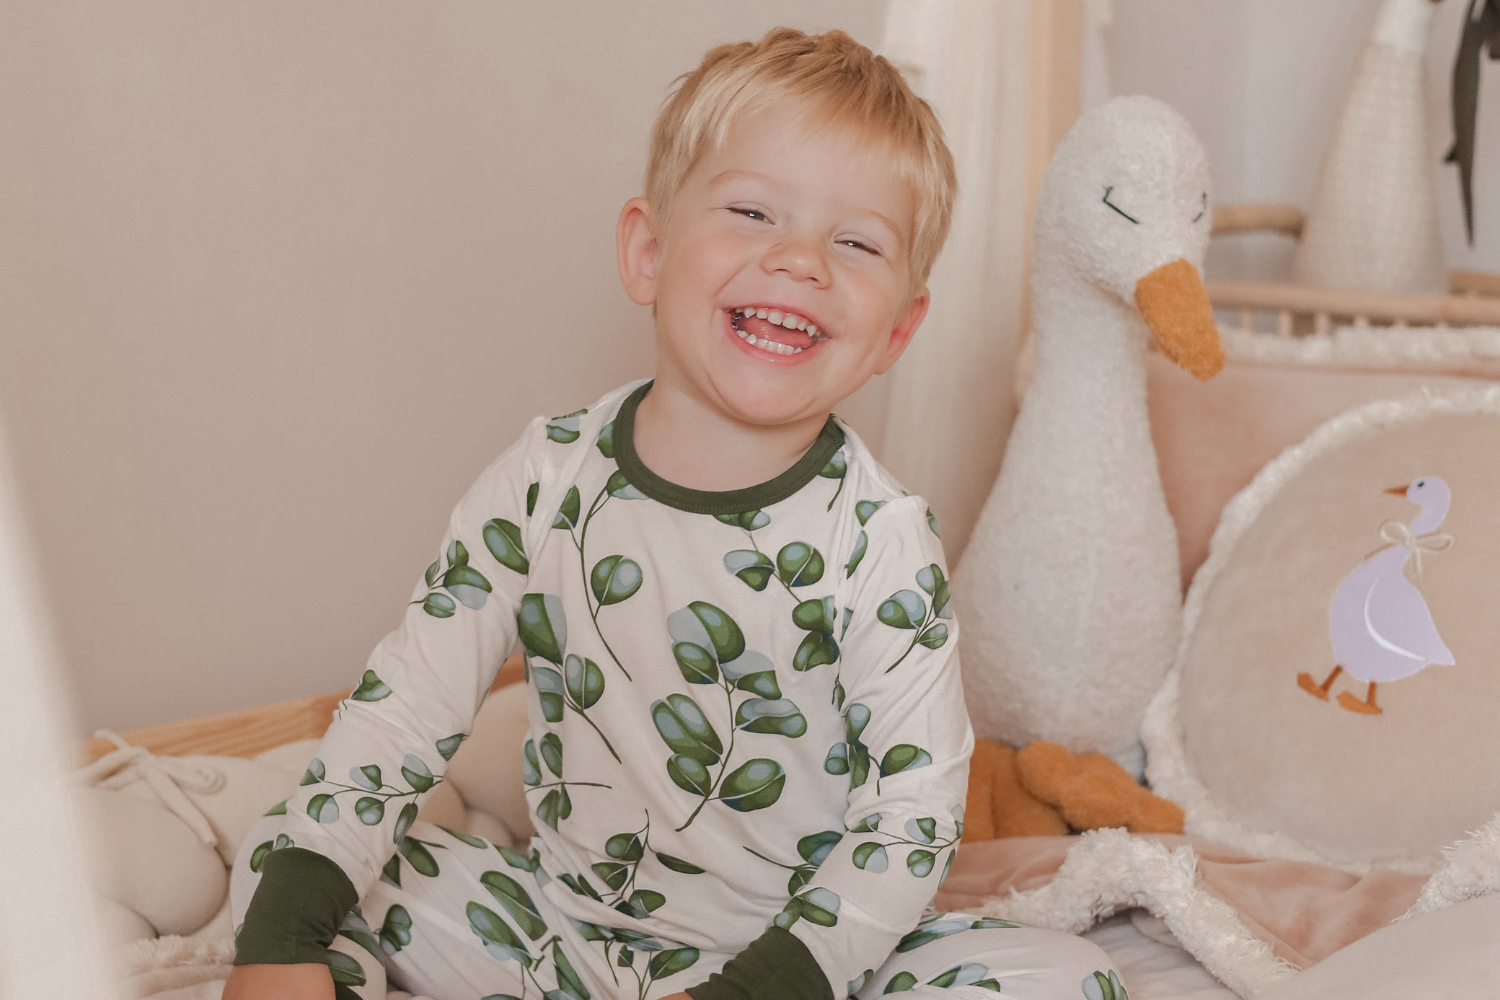 How to Choose the Best Pajamas for Kids of All Ages - Pajamas for